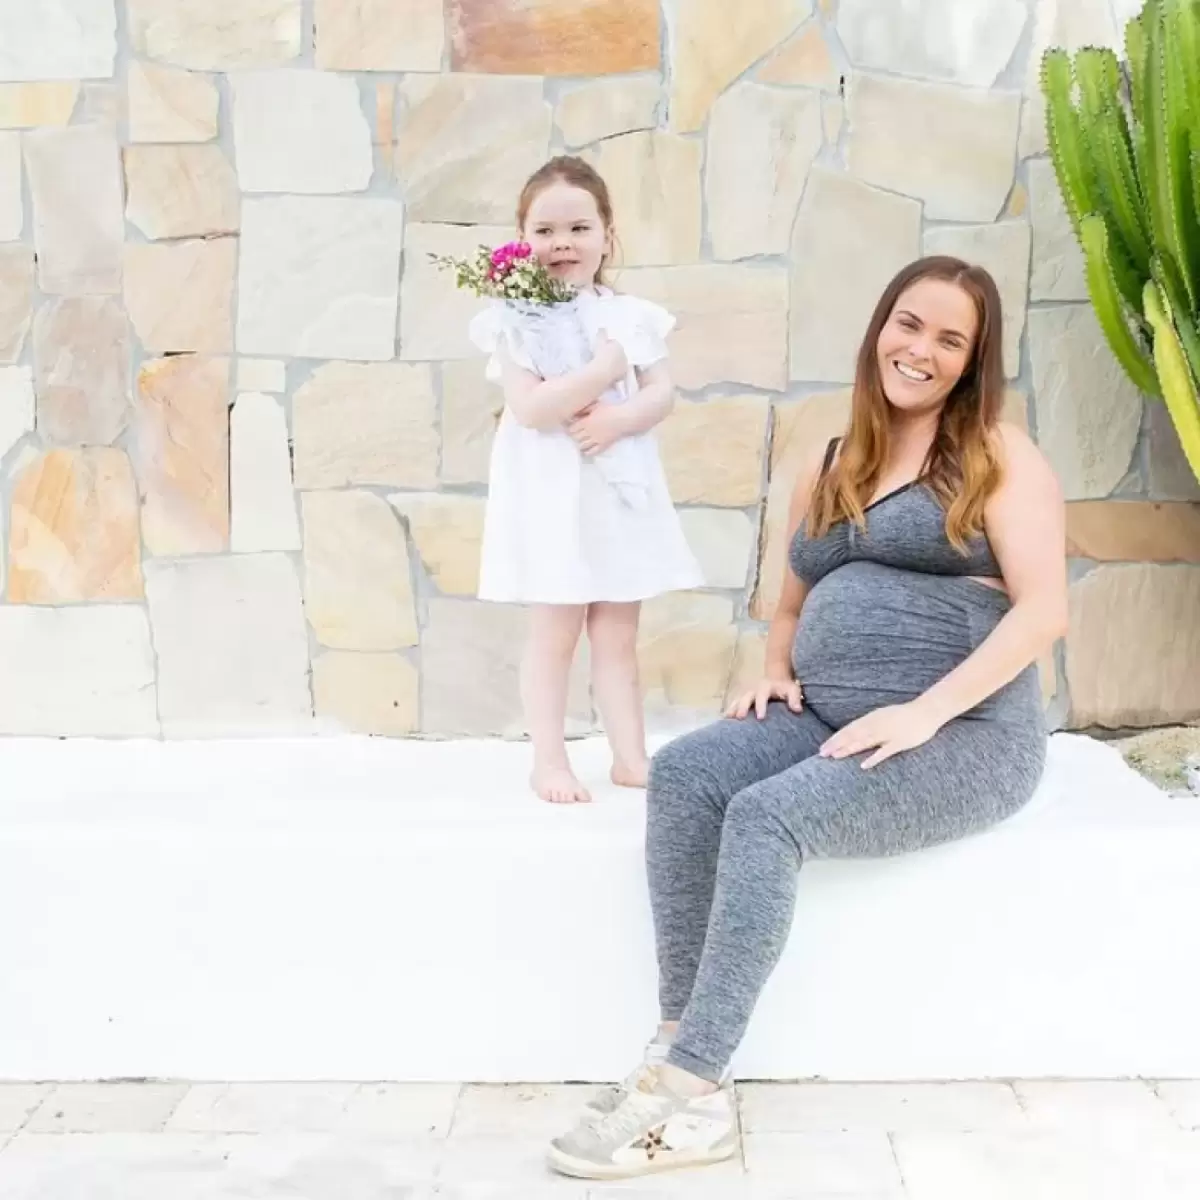 Maternity activewear  PrettyLittleThing AUS